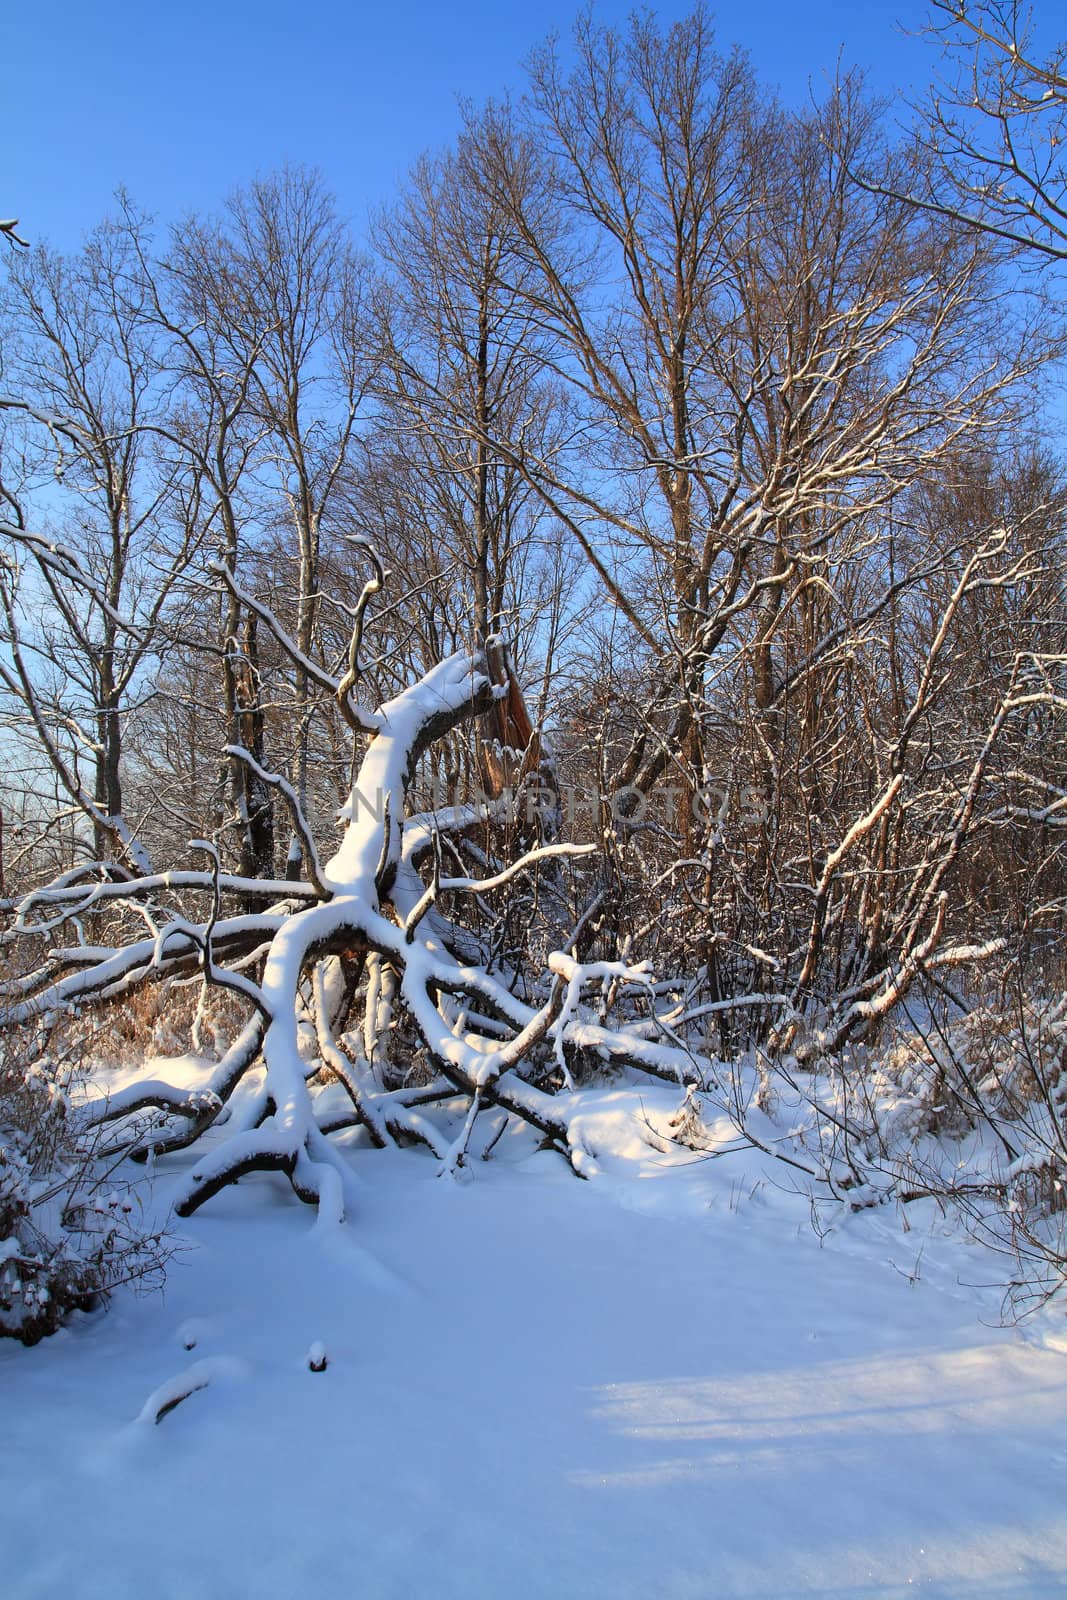 tumbled tree in winter wood by basel101658